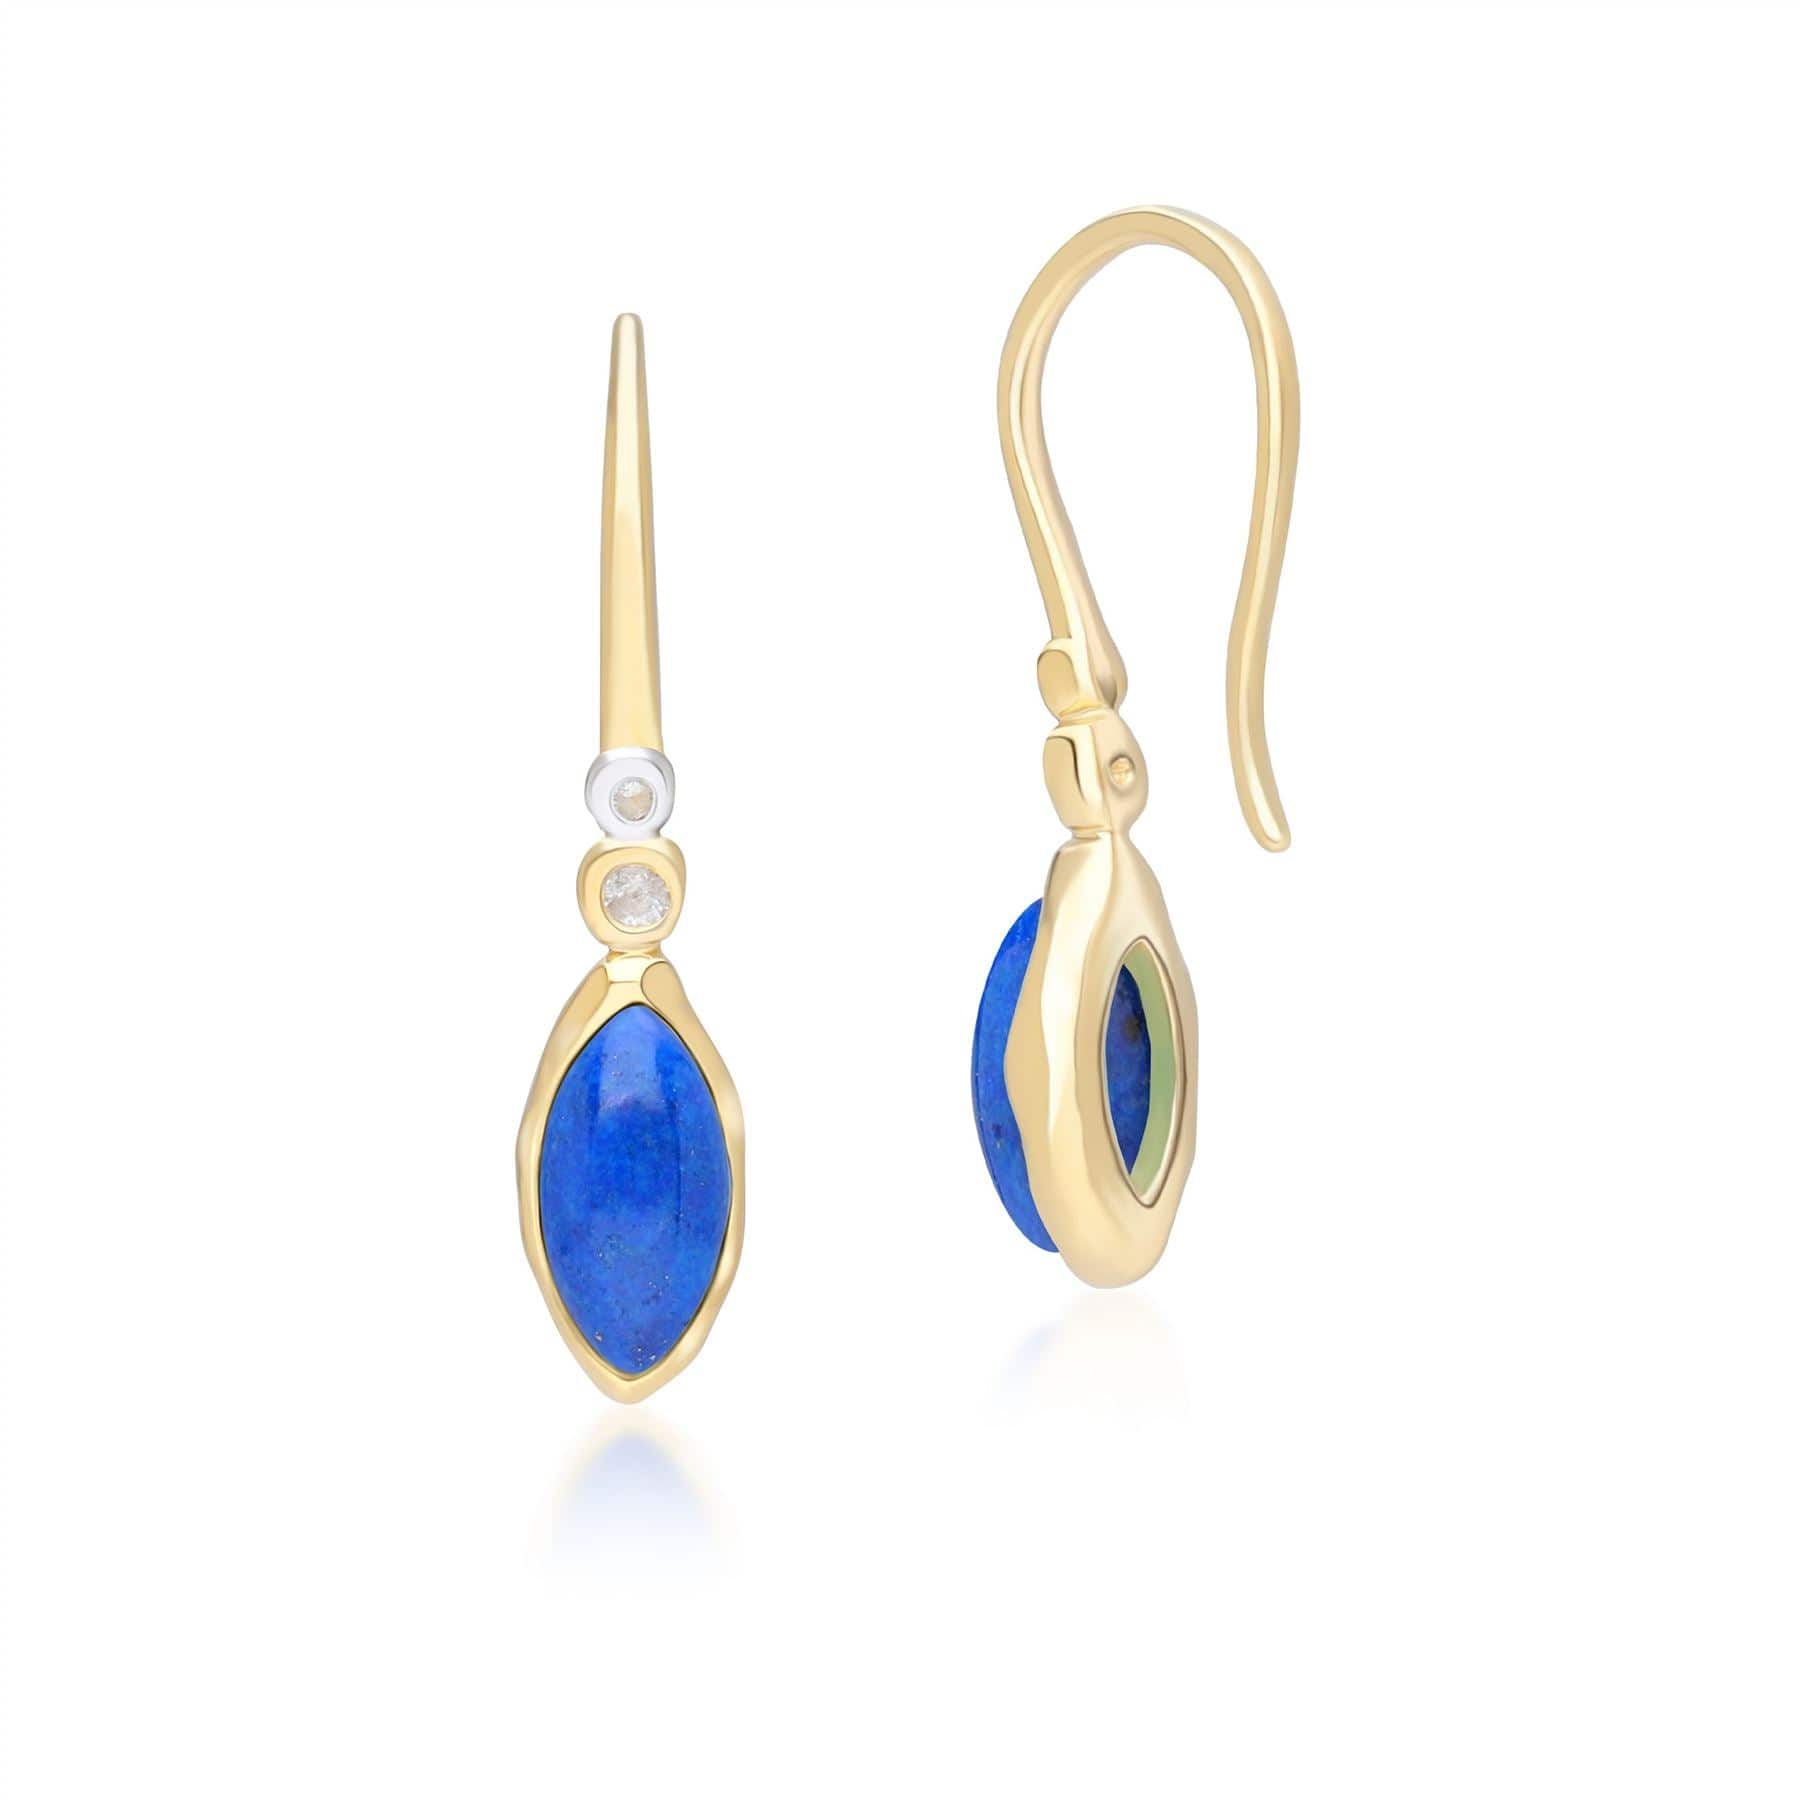 Irregular Marquise Lapis Lazuli & Topaz Drop Earrings In 18ct Gold Plated Sterling Silver